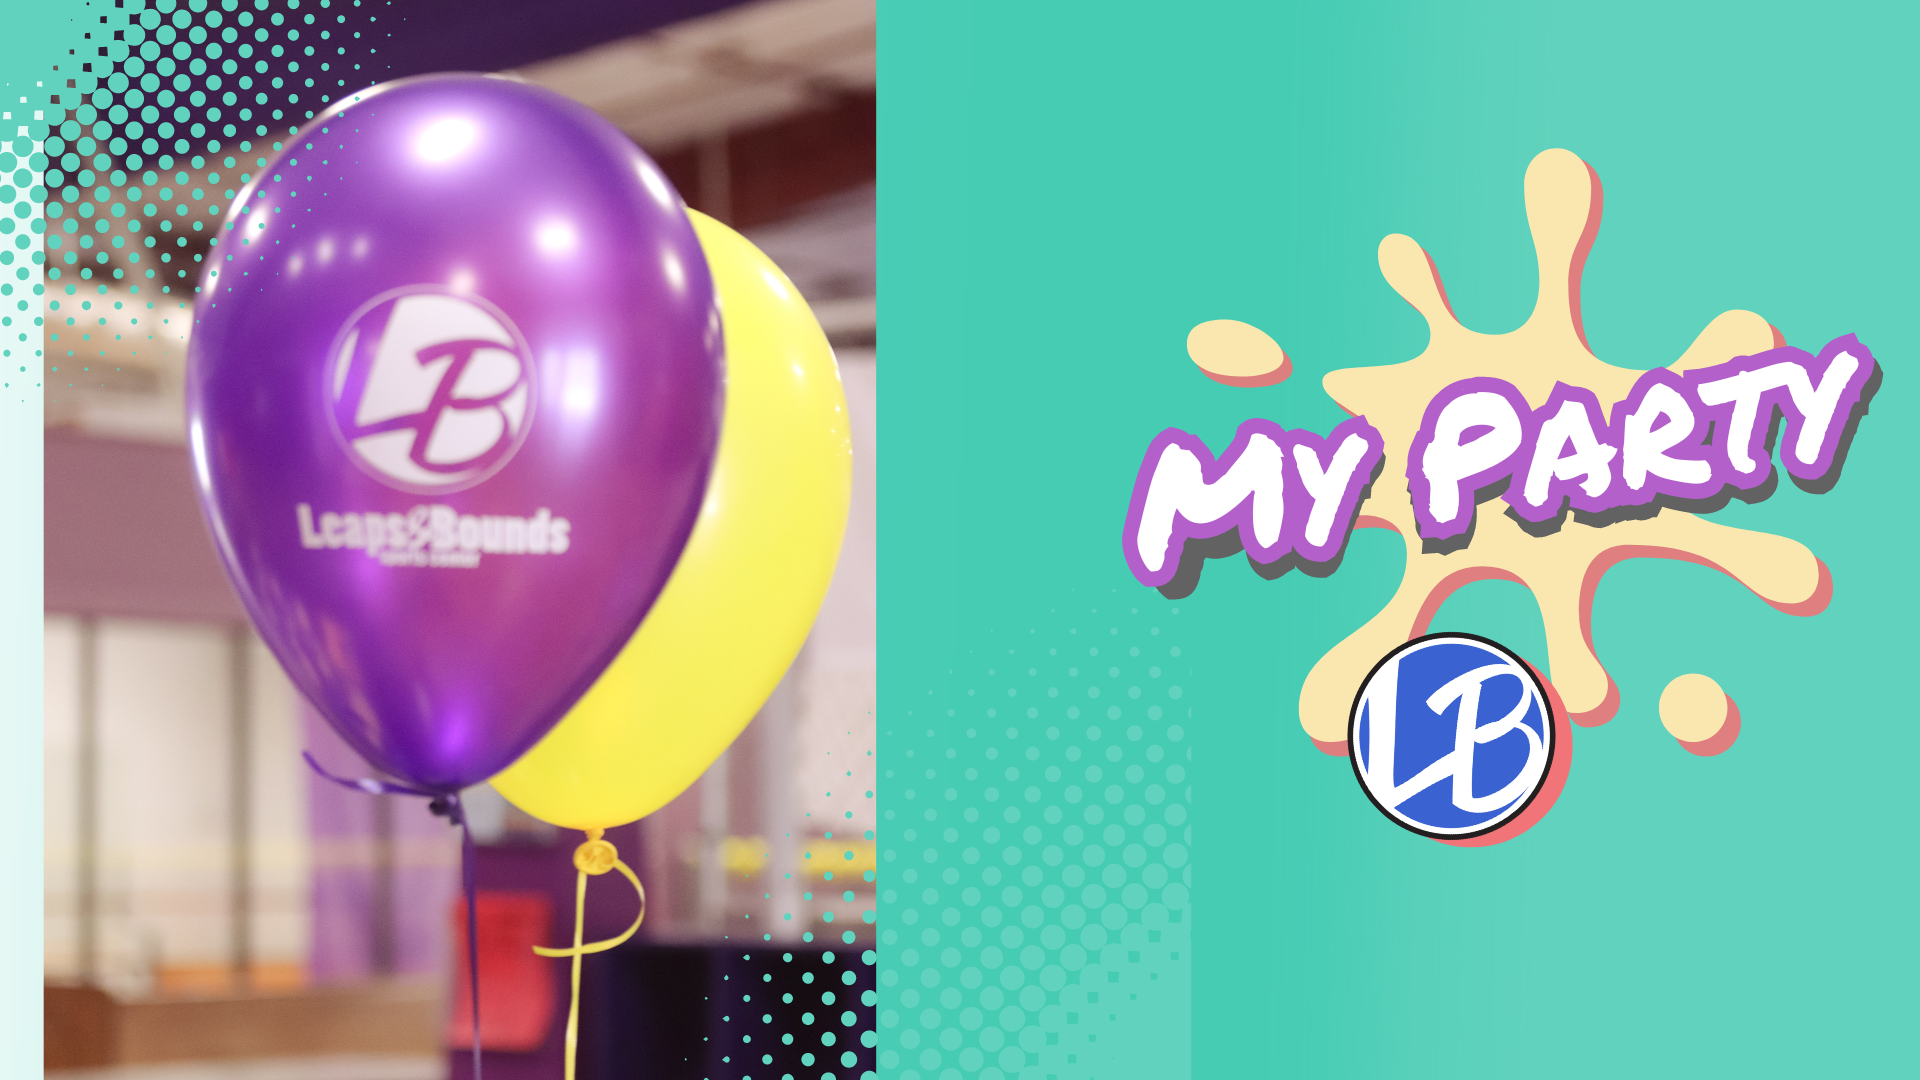 A close-up shot of purple and yellow balloons with the Leaps & Bounds Gymnastics logo on them is on the left side. On the right side, there's a colorful "My Party" graphic with the LB logo underneath it on a green background.